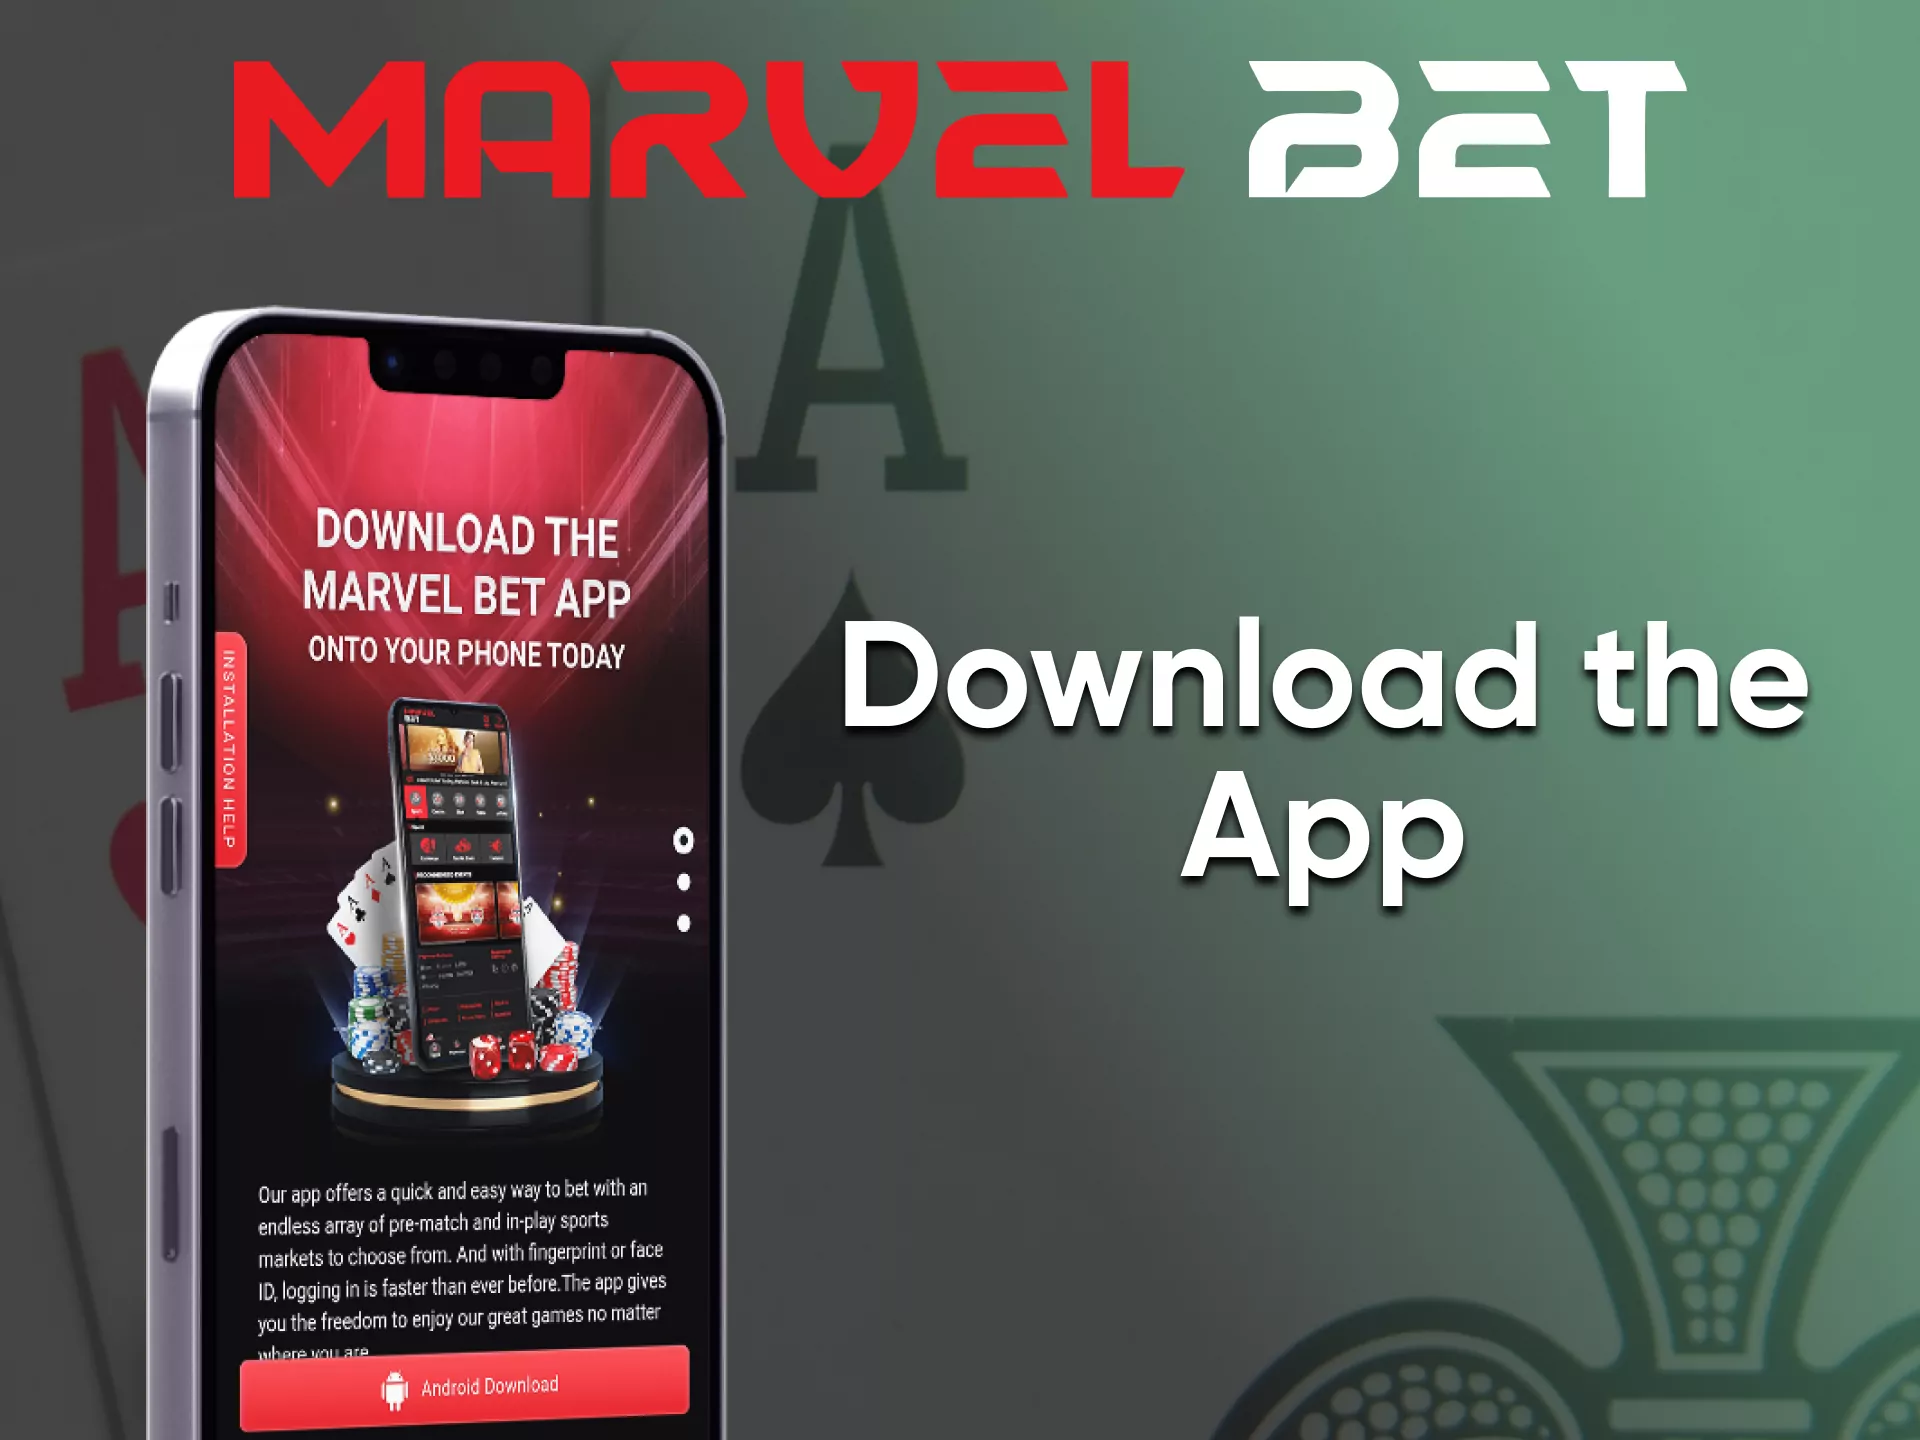 Install a casino from Marvelbet on your device.